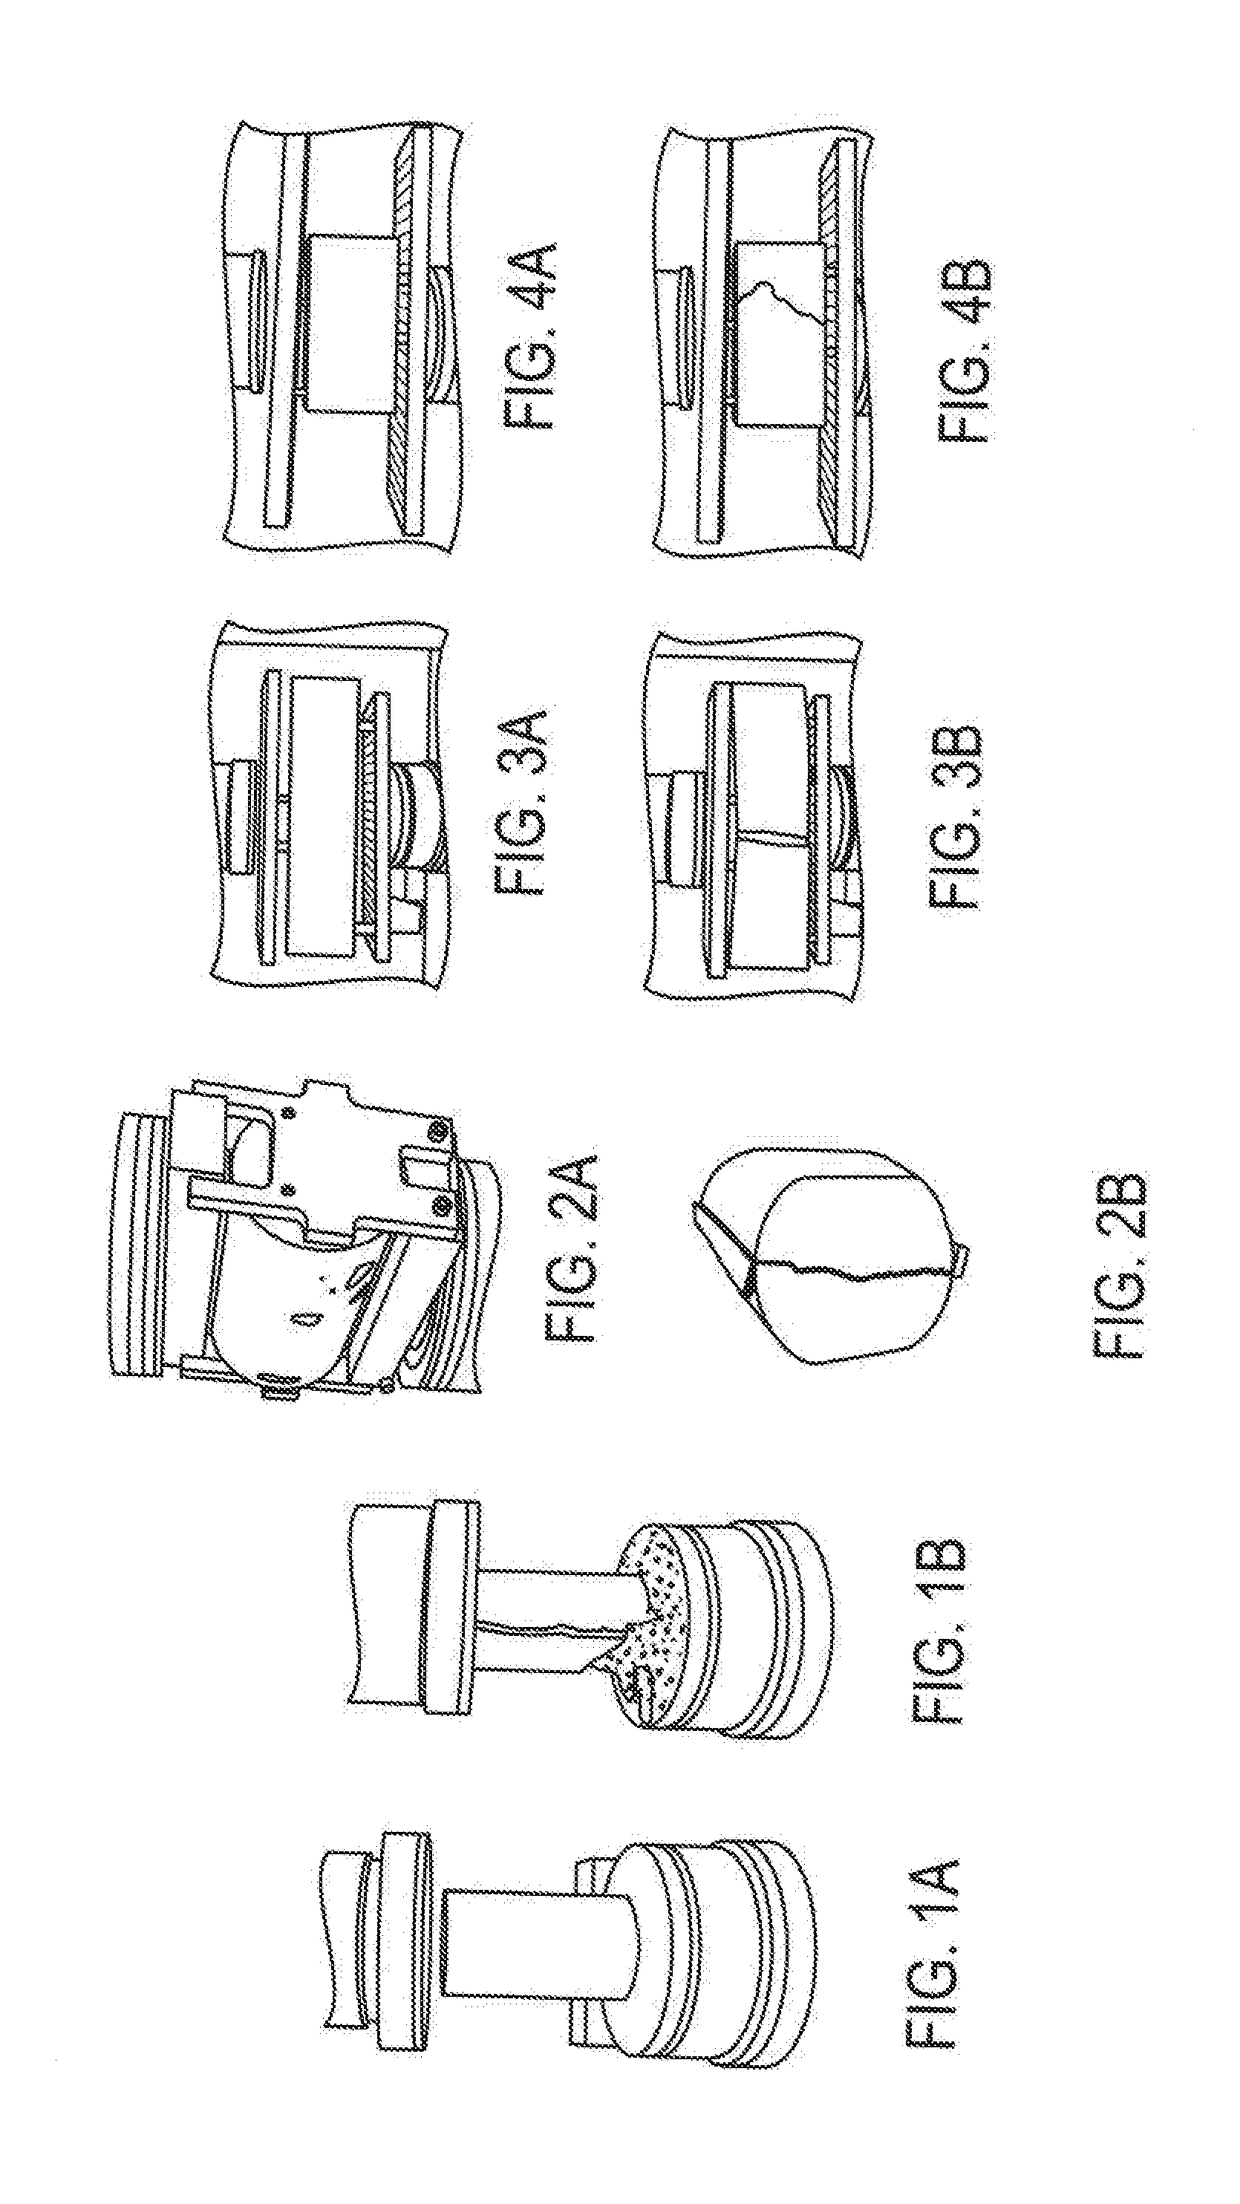 Torsion Testing Devices and Methods